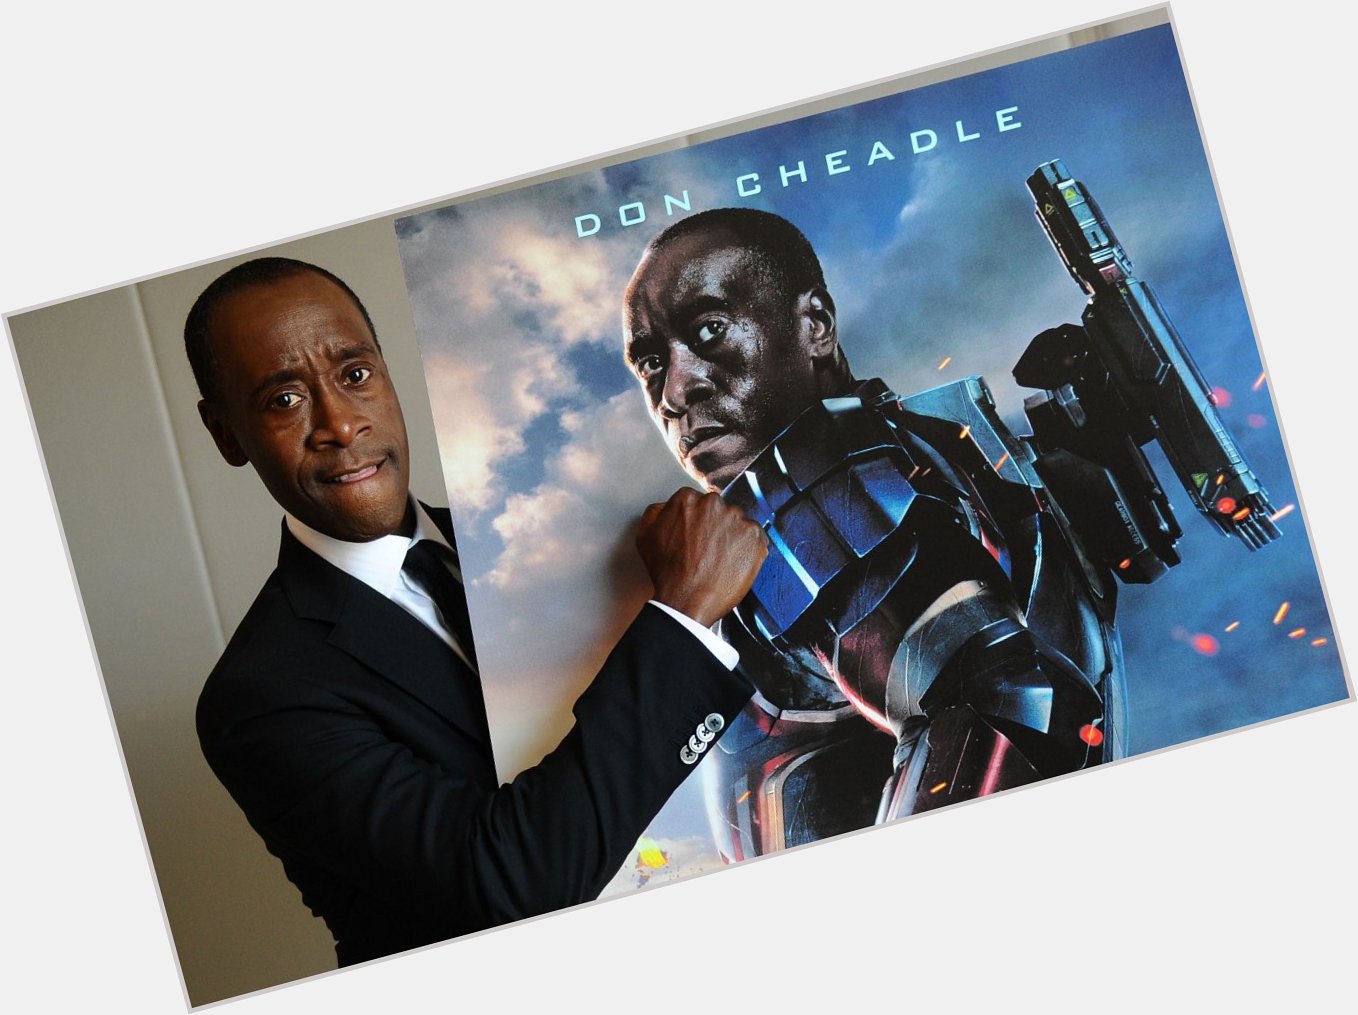 A HUGE Happy Birthday to Don Cheadle a.k.a War Machine! This Marvel hero turns 51 today. 